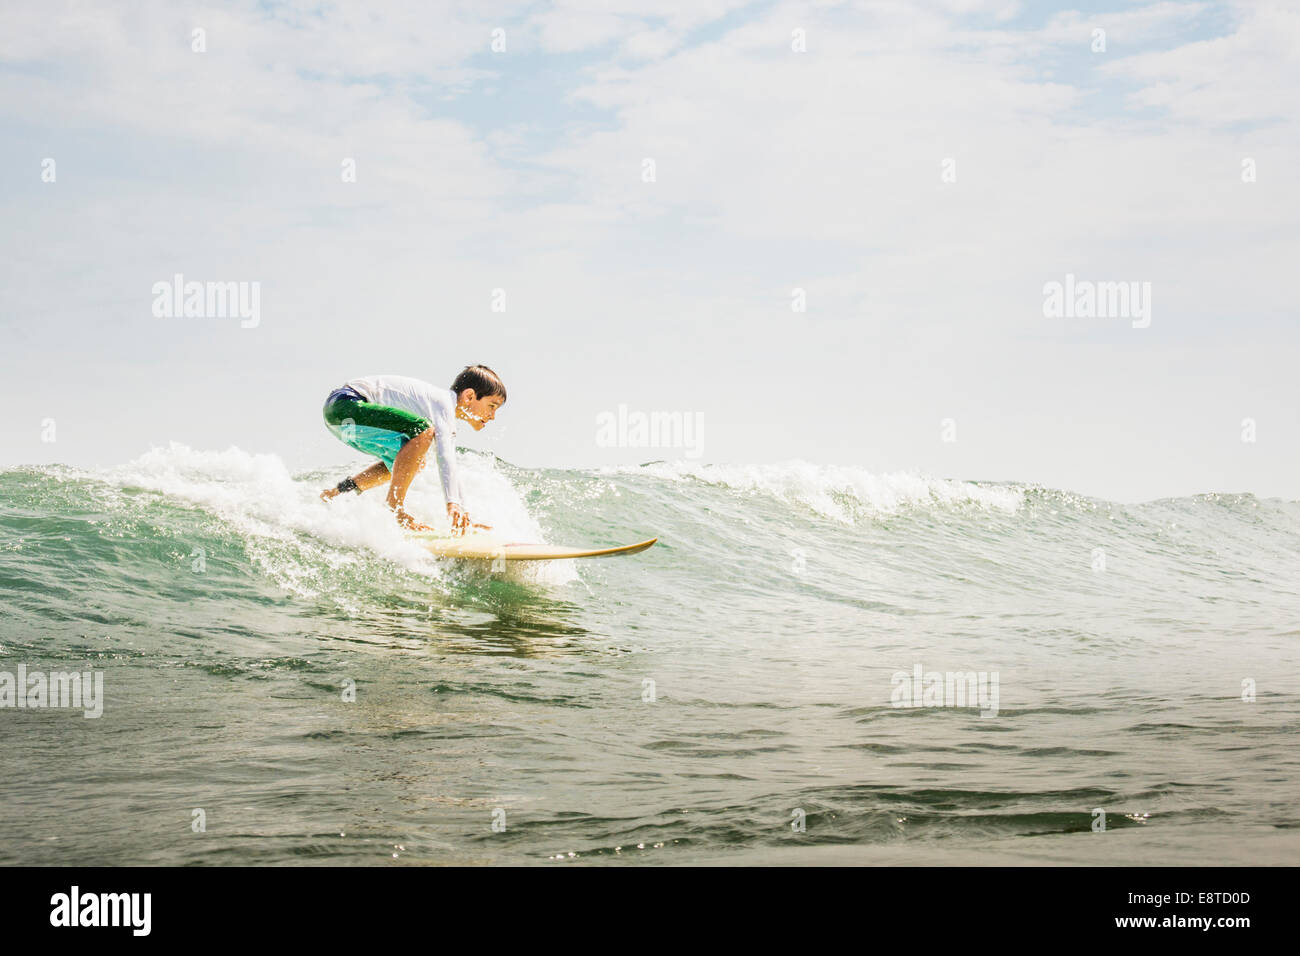 Mixed race boy surfing in waves Stock Photo